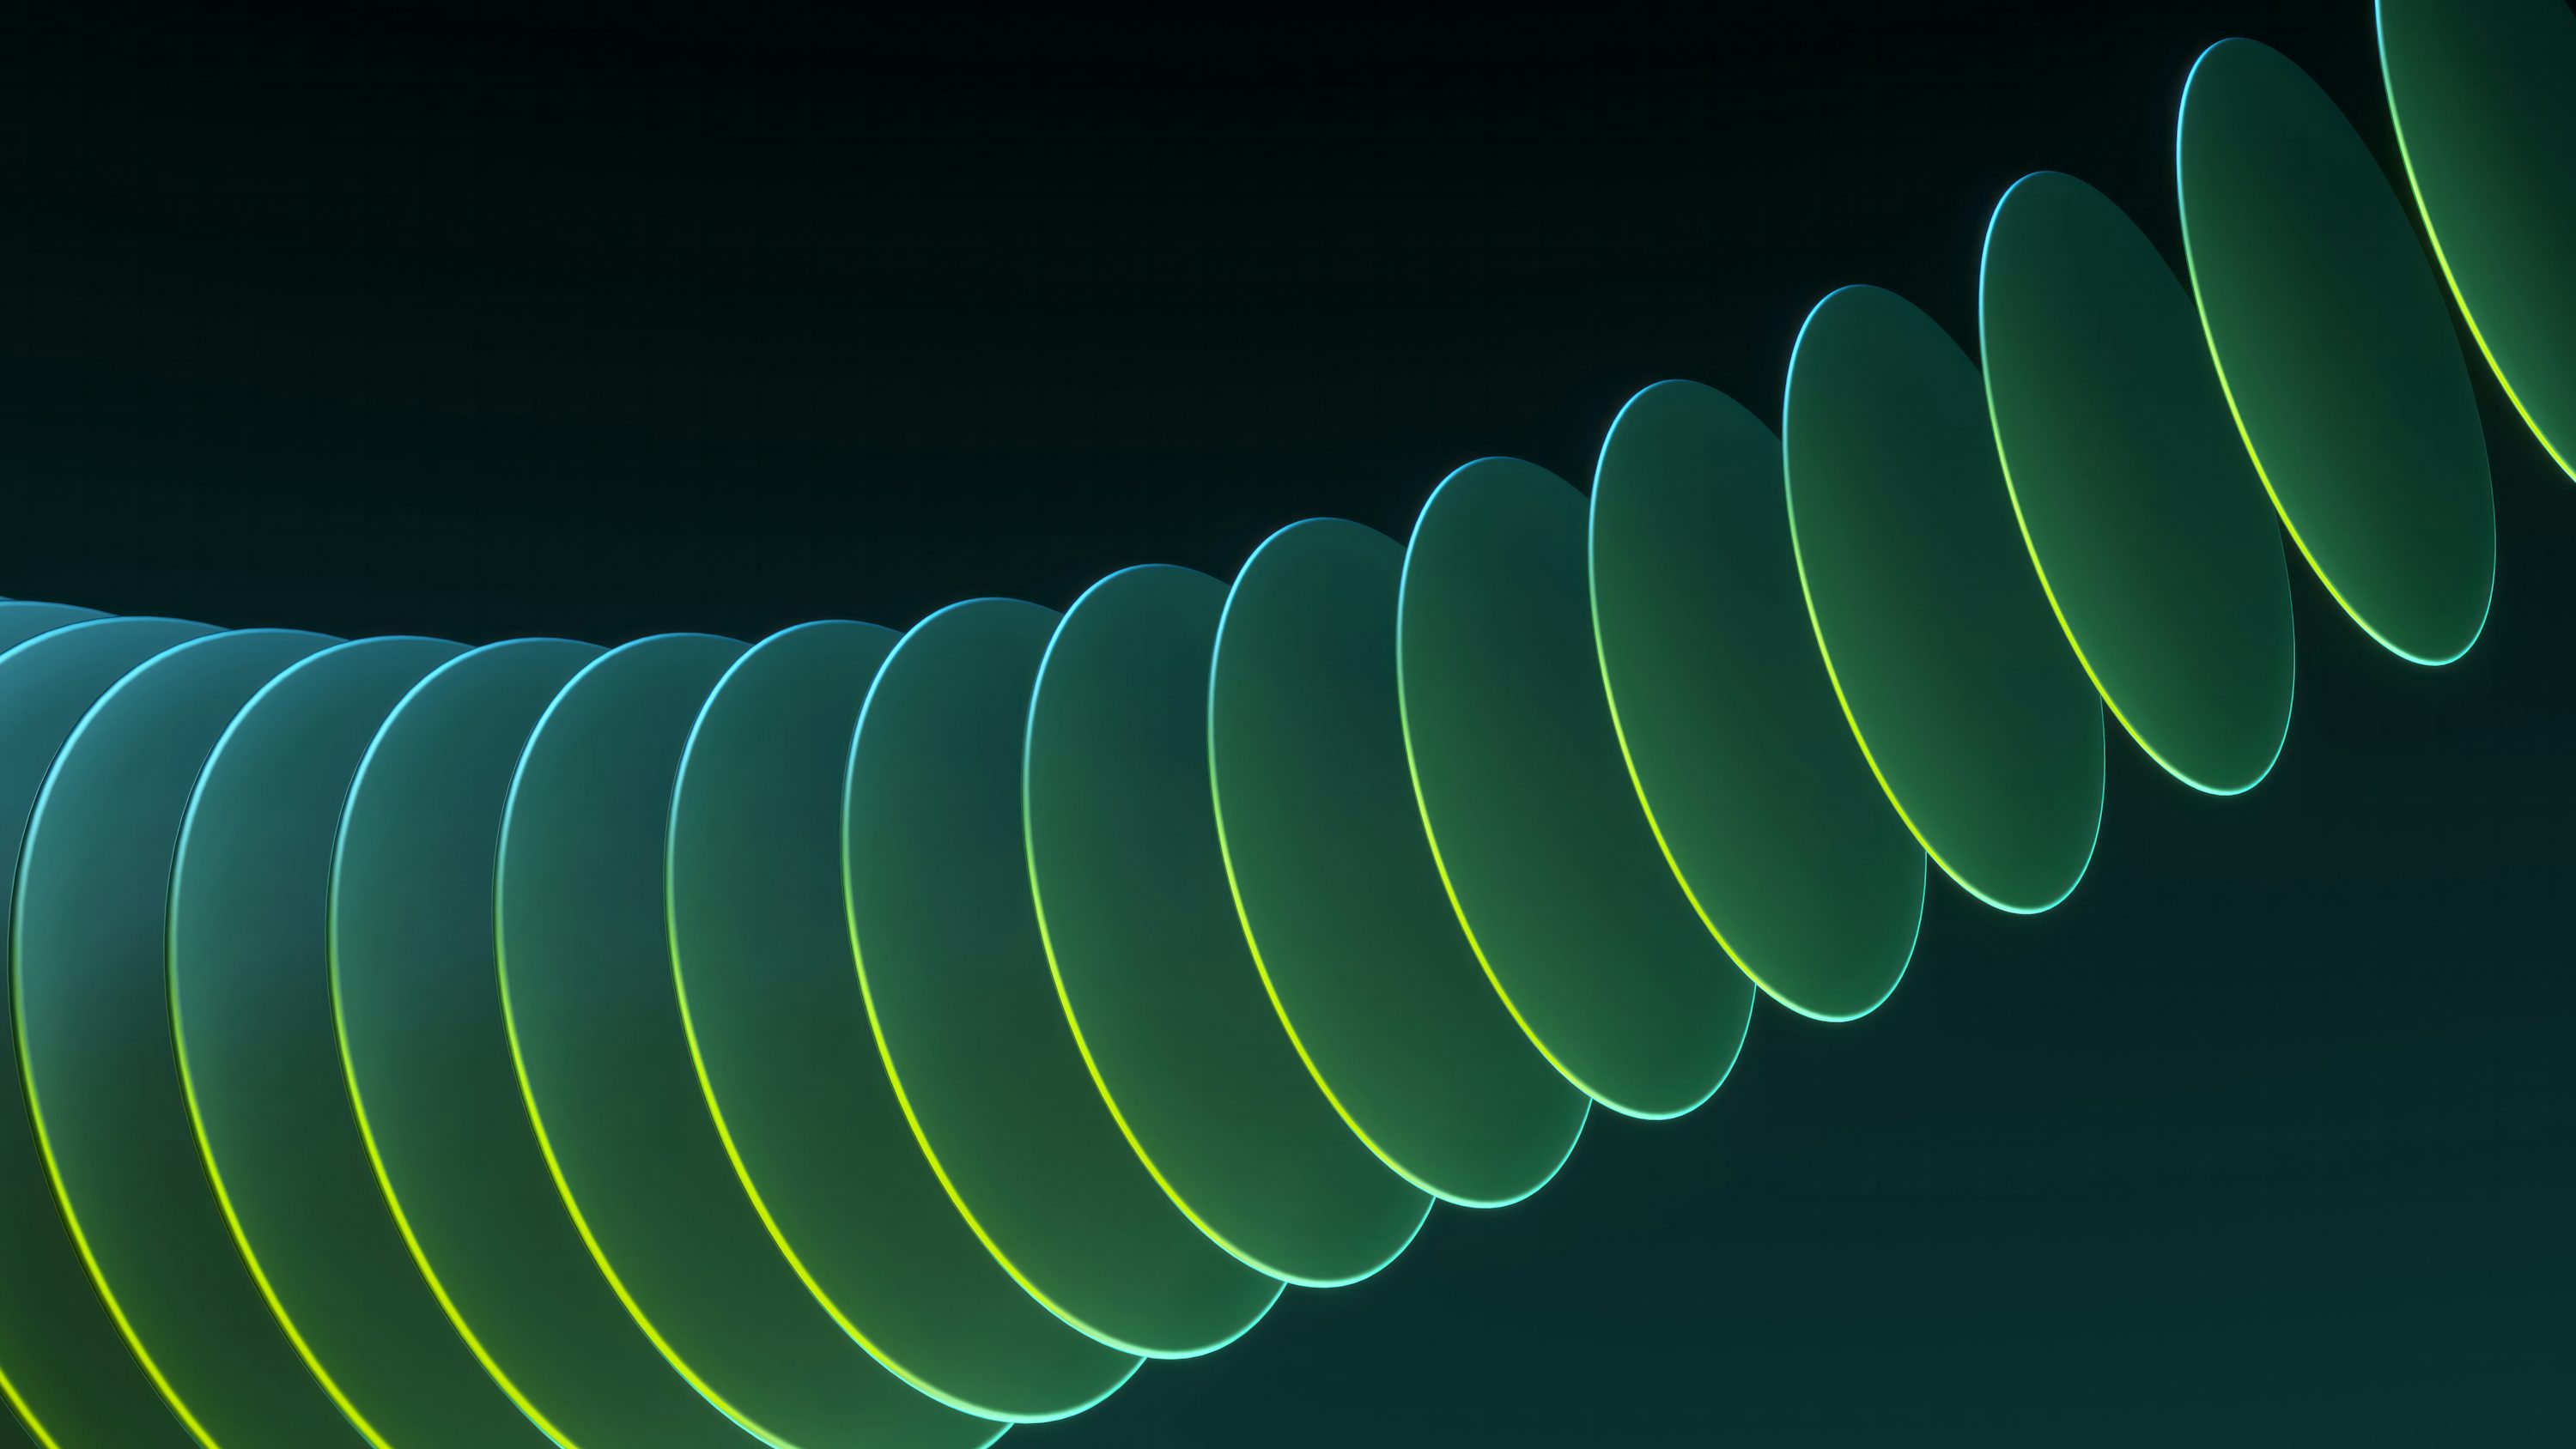 an abstract image of a curved green line